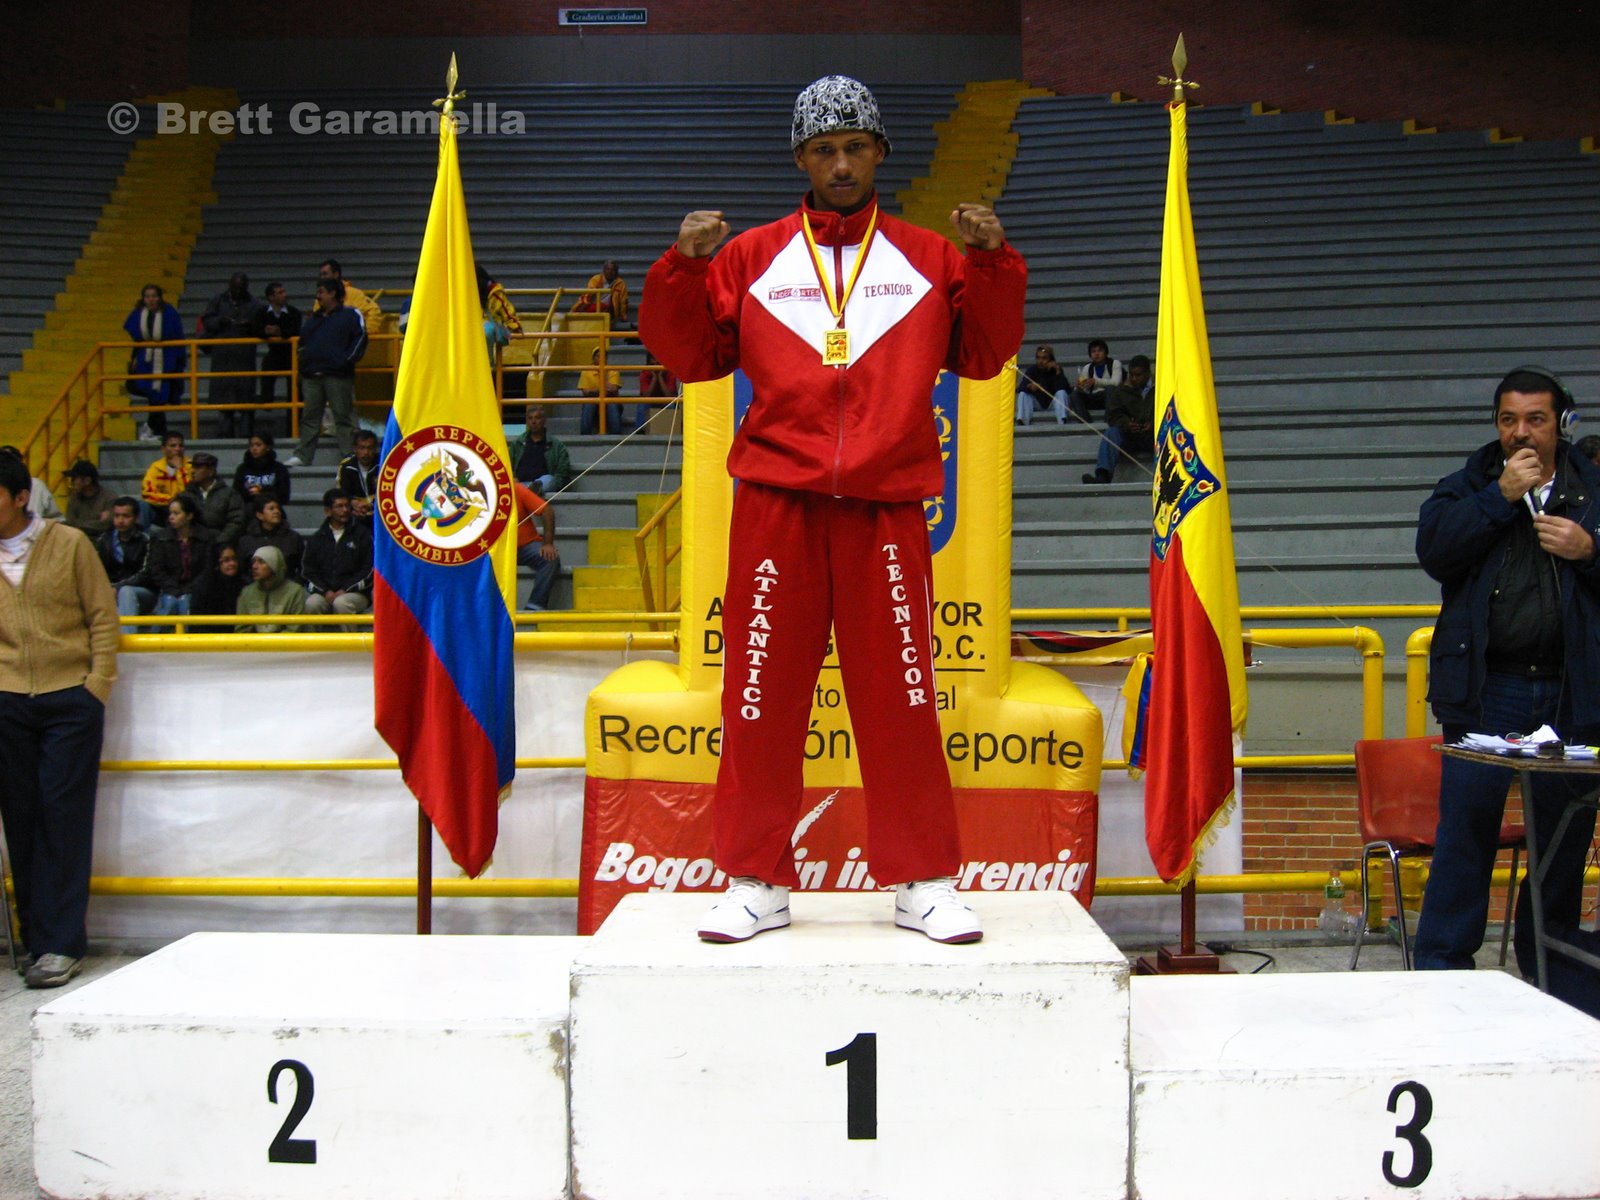 [Colombia+boxing+champ+3.jpg]